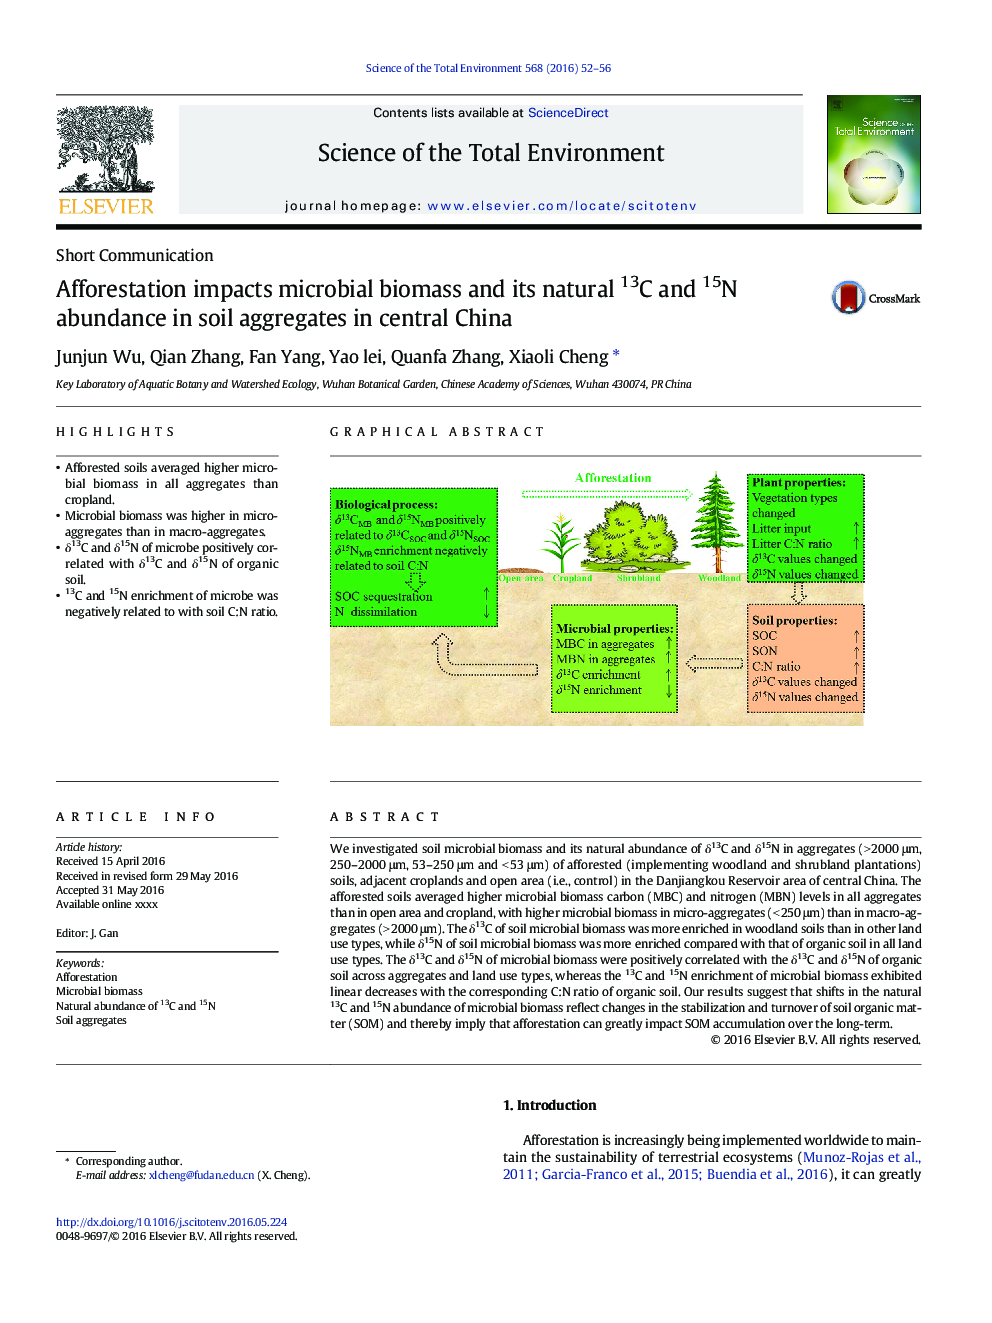 Afforestation impacts microbial biomass and its natural 13C and 15N abundance in soil aggregates in central China